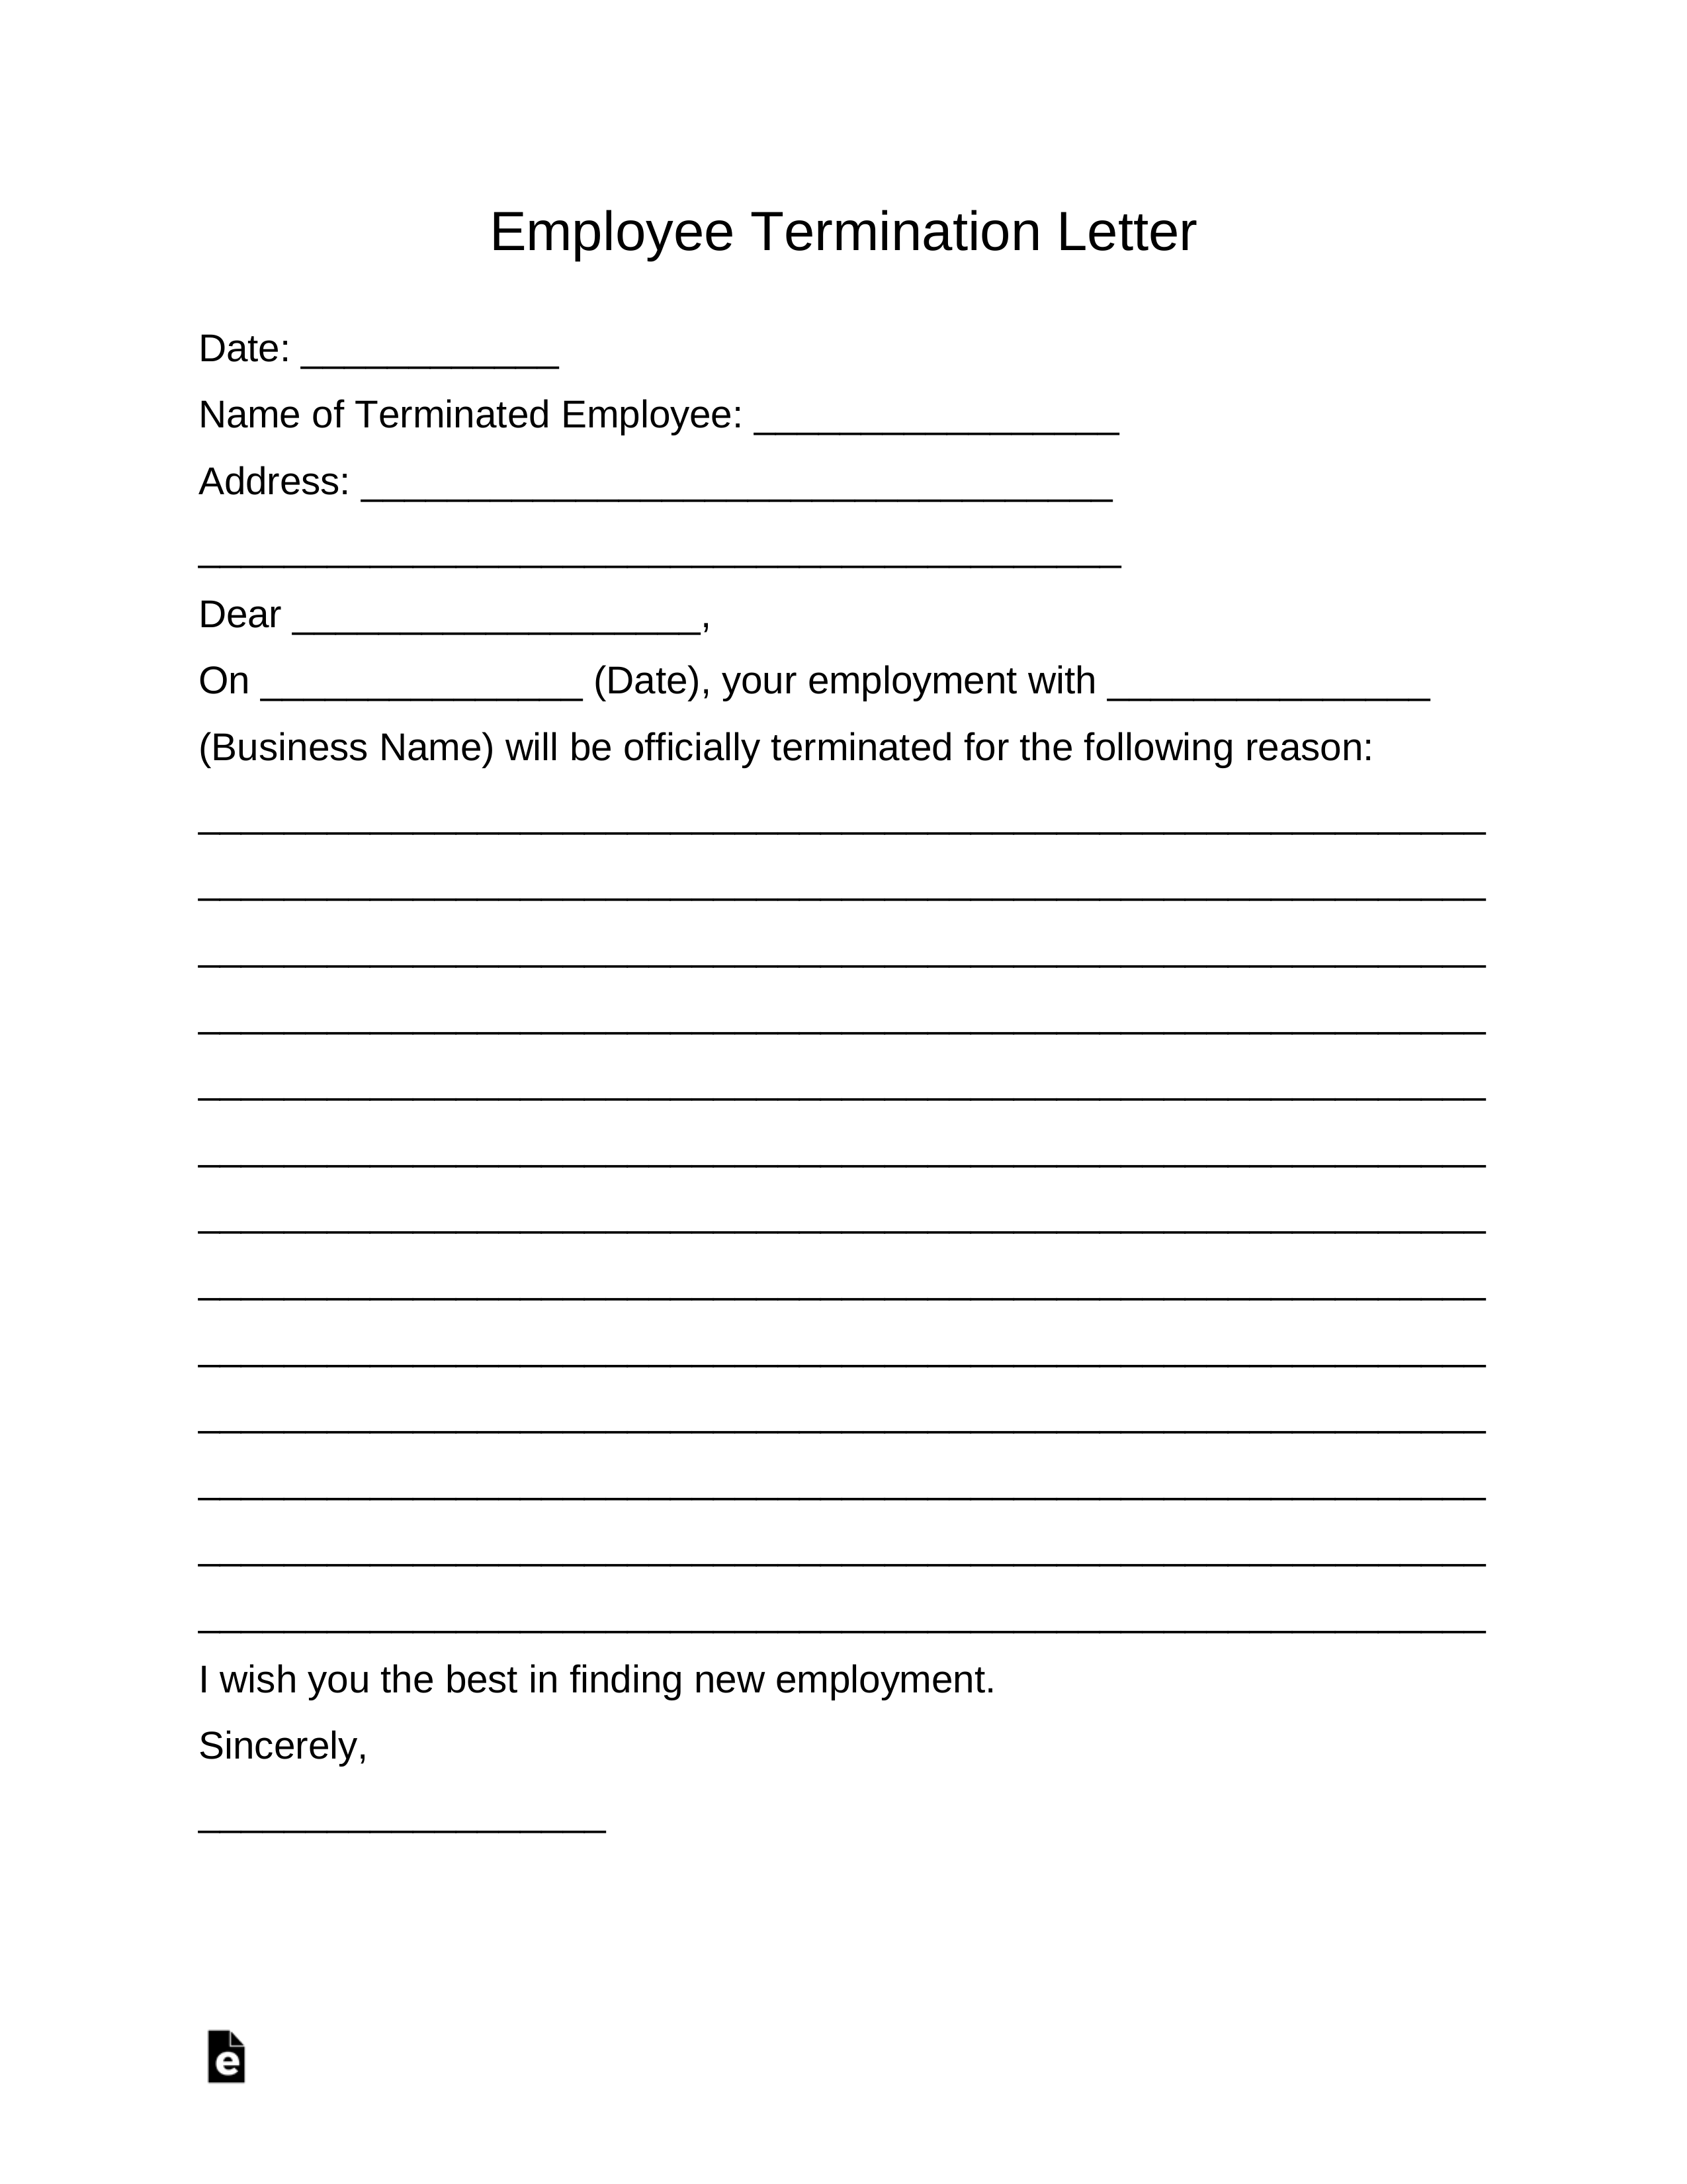 Employment Termination Letter Pdf from eforms.com